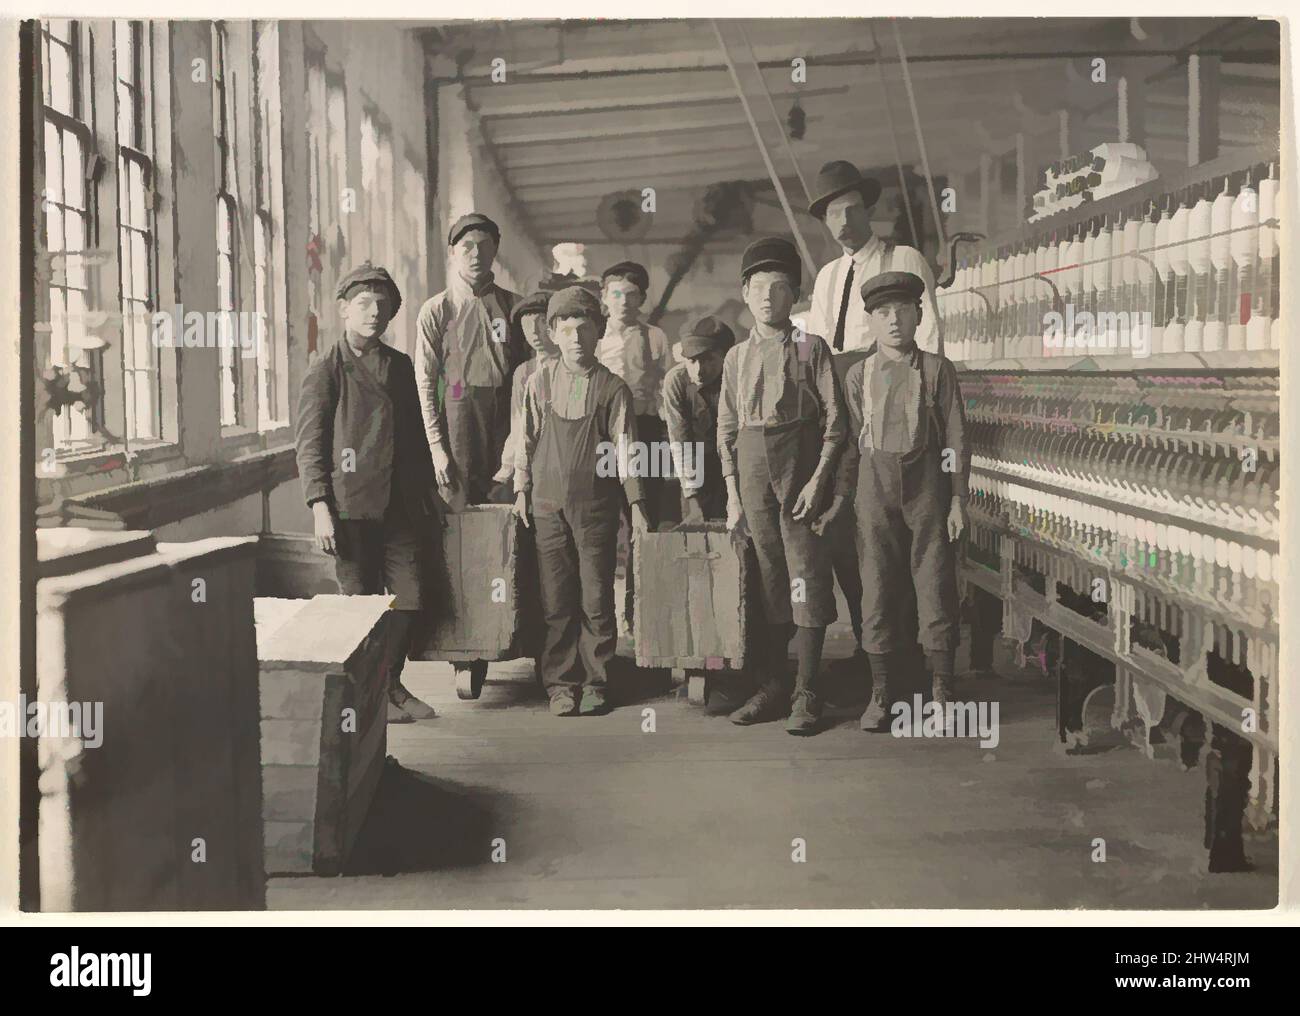 Art inspired by Mill Children #440, South Carolina, 1908, Gelatin silver print, Image: 11.9 x 16.9 cm (4 11/16 x 6 5/8 in.), Photographs, Lewis Hine (American, 1874–1940), Trained as a sociologist at Columbia University, Hine gave up his teaching job in 1908 to become chief, Classic works modernized by Artotop with a splash of modernity. Shapes, color and value, eye-catching visual impact on art. Emotions through freedom of artworks in a contemporary way. A timeless message pursuing a wildly creative new direction. Artists turning to the digital medium and creating the Artotop NFT Stock Photo